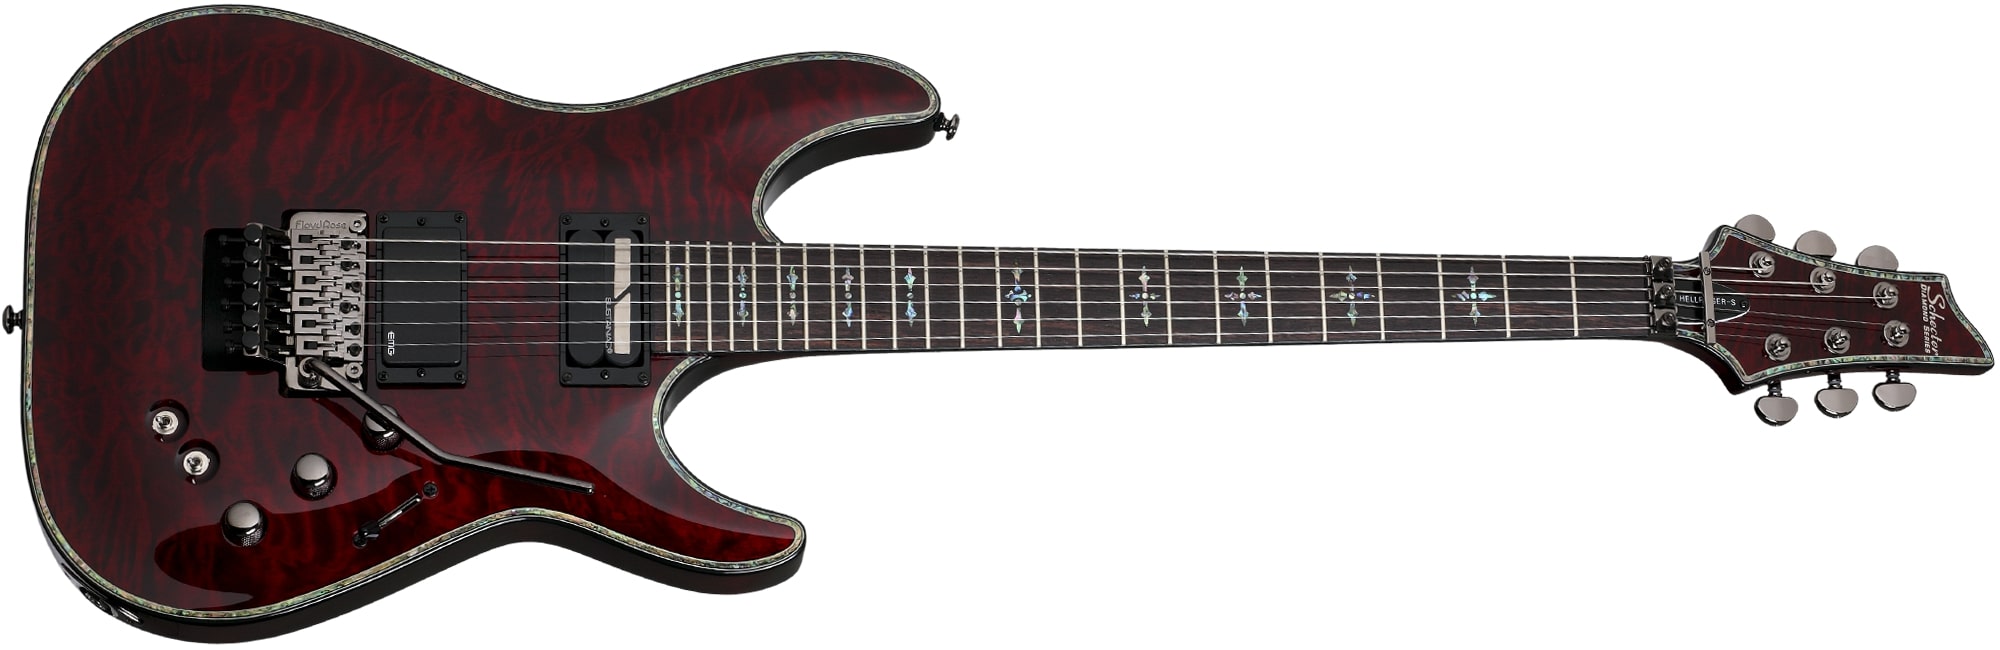 Schecter Hellraiser C-1 with Floyd Rose and Sustainiac 6 String Electric Guitar - Black Cherry 1826-SHC - The Guitar World